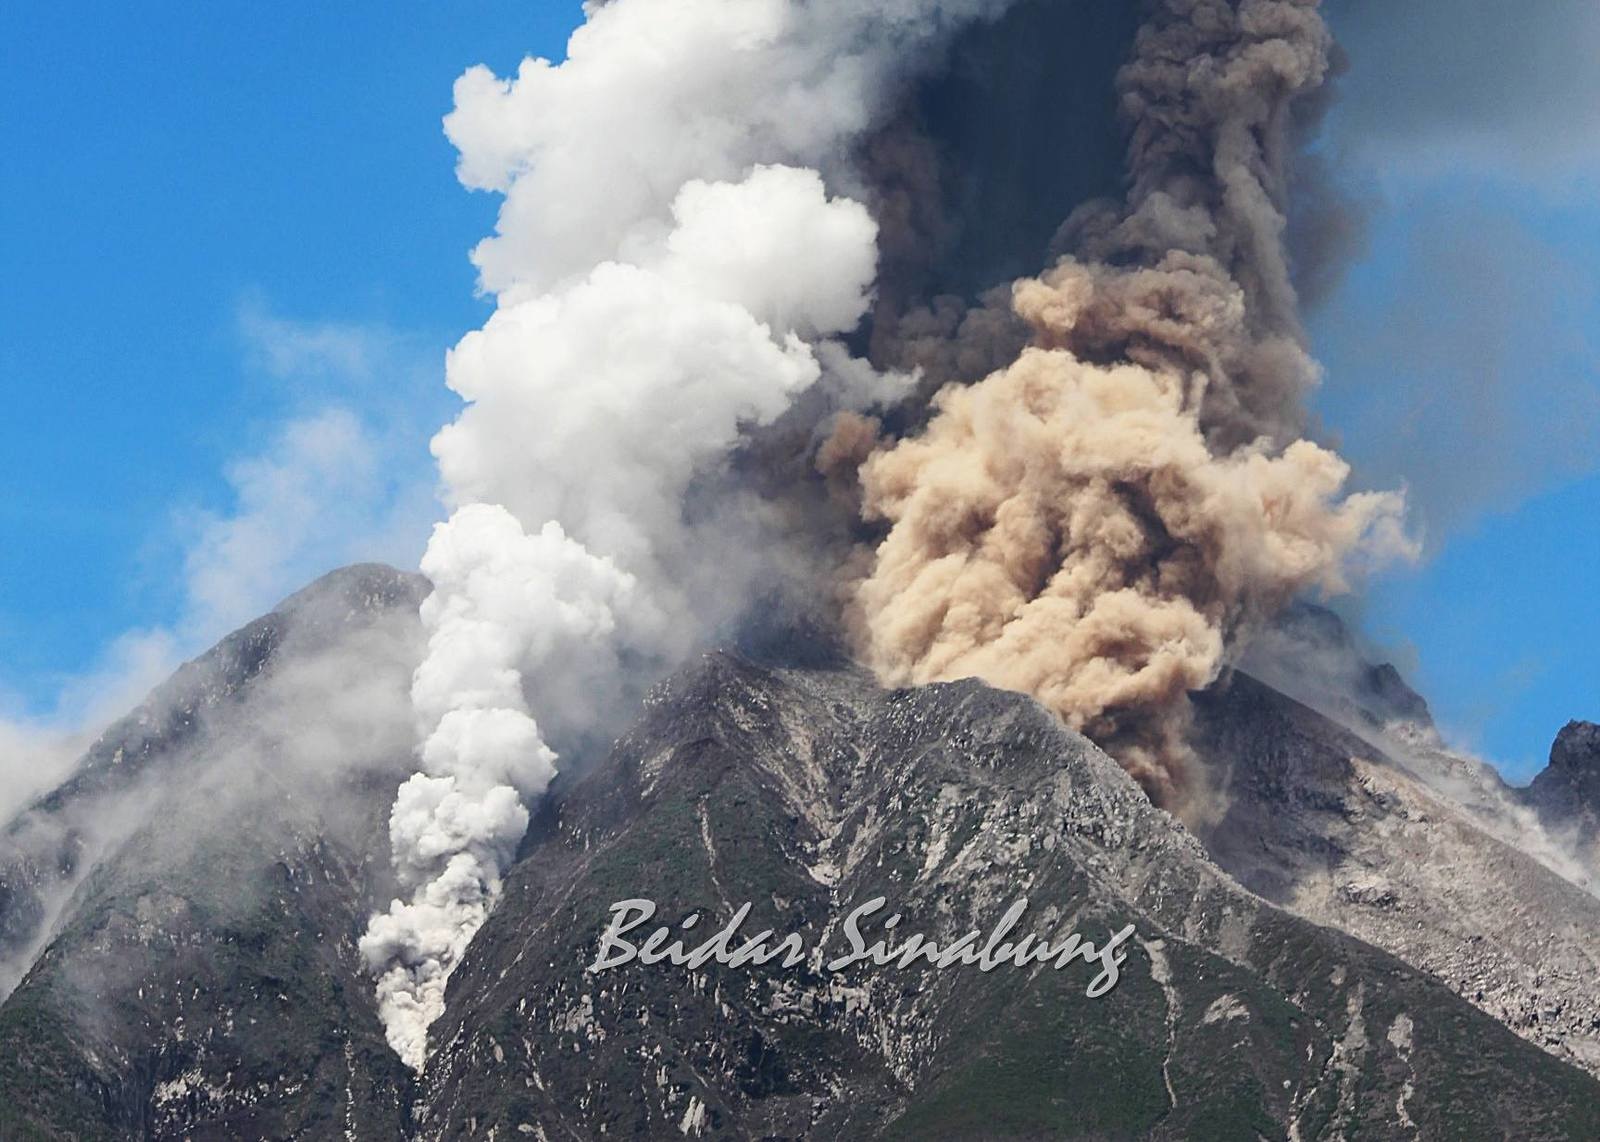 Enhanced volcanic activity and eruption at Sinabung volcano on February 4, 2017